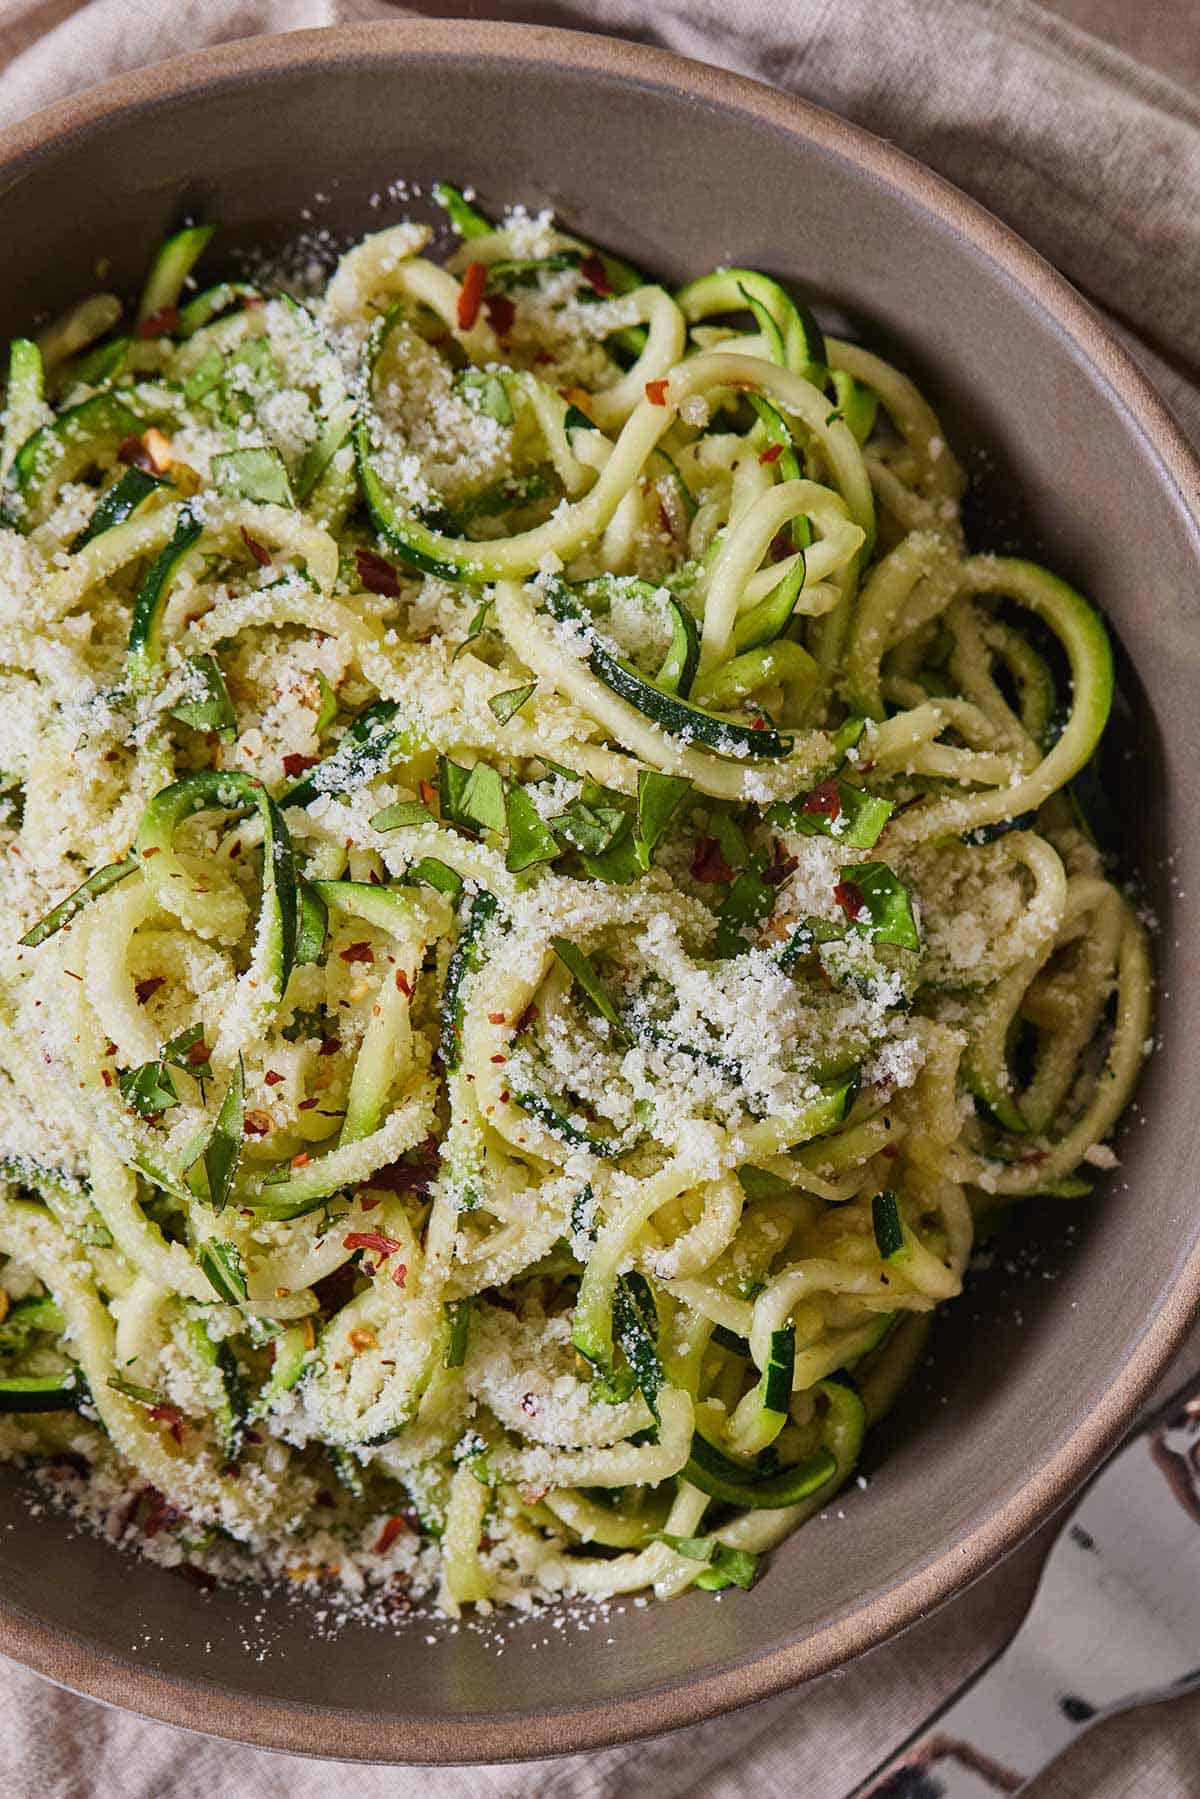 Overhead view of a bowl of zucchini noodles with parmesan and red chili flakes.